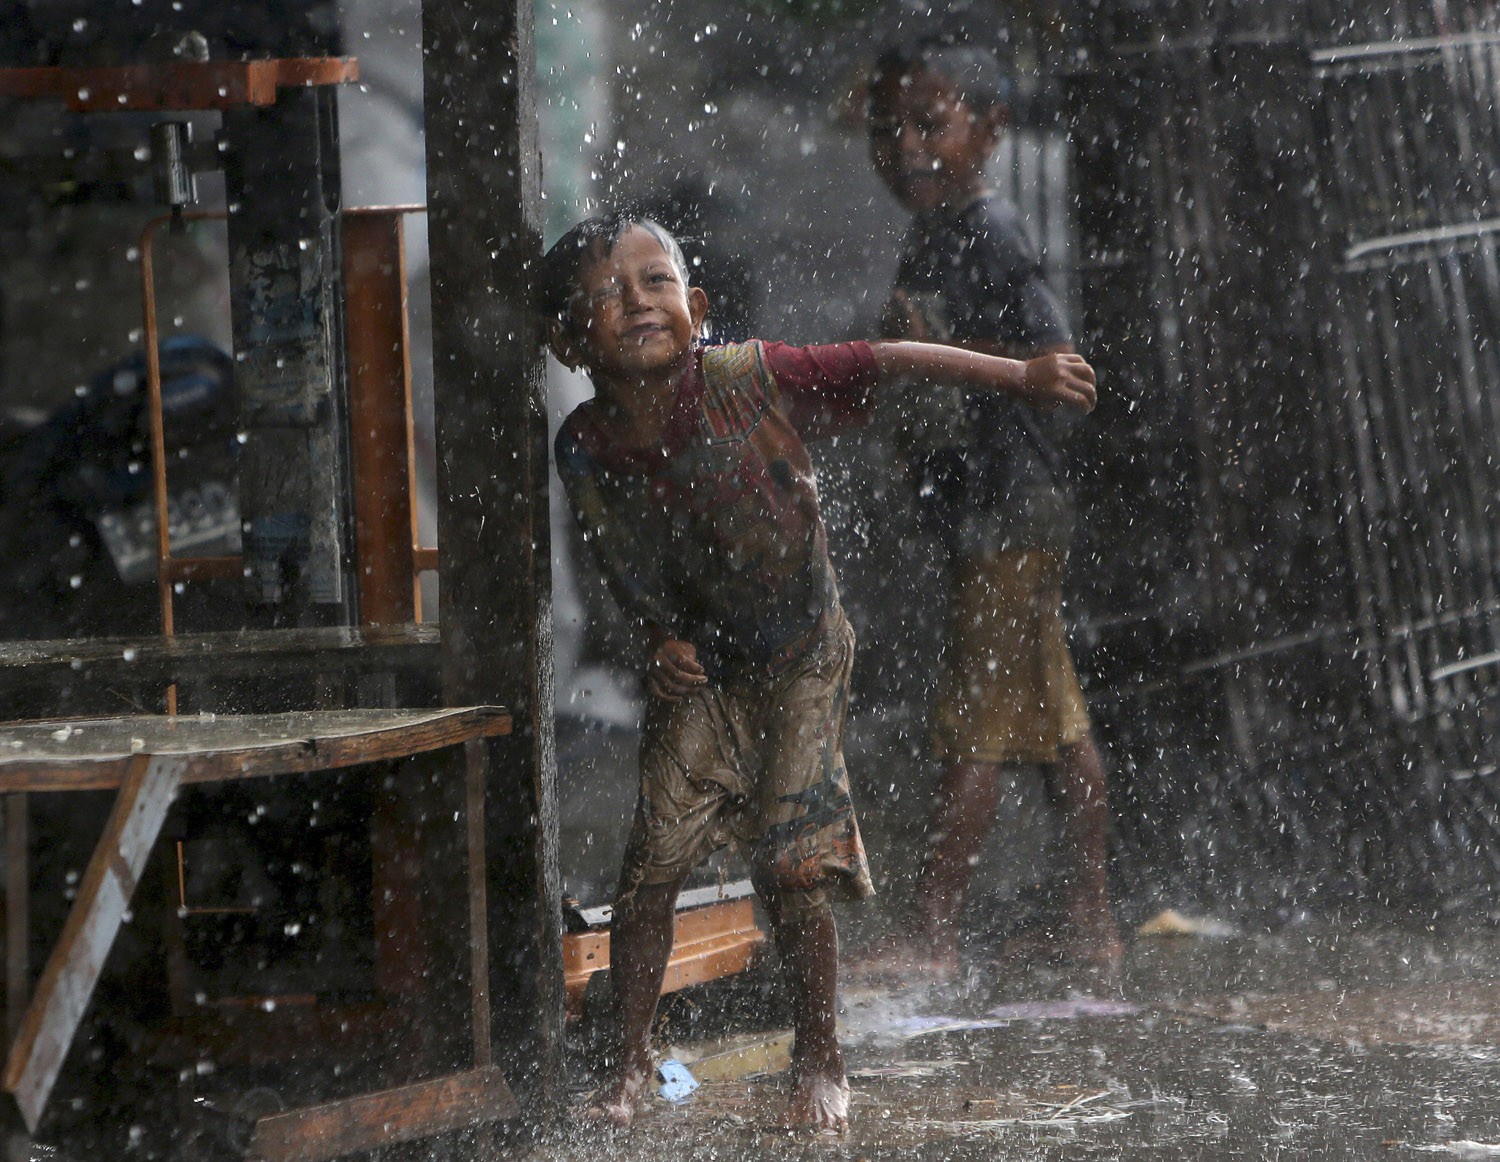 Indonesian children play in the rain during a heavy downpour in Jakarta on May 28, 2014.